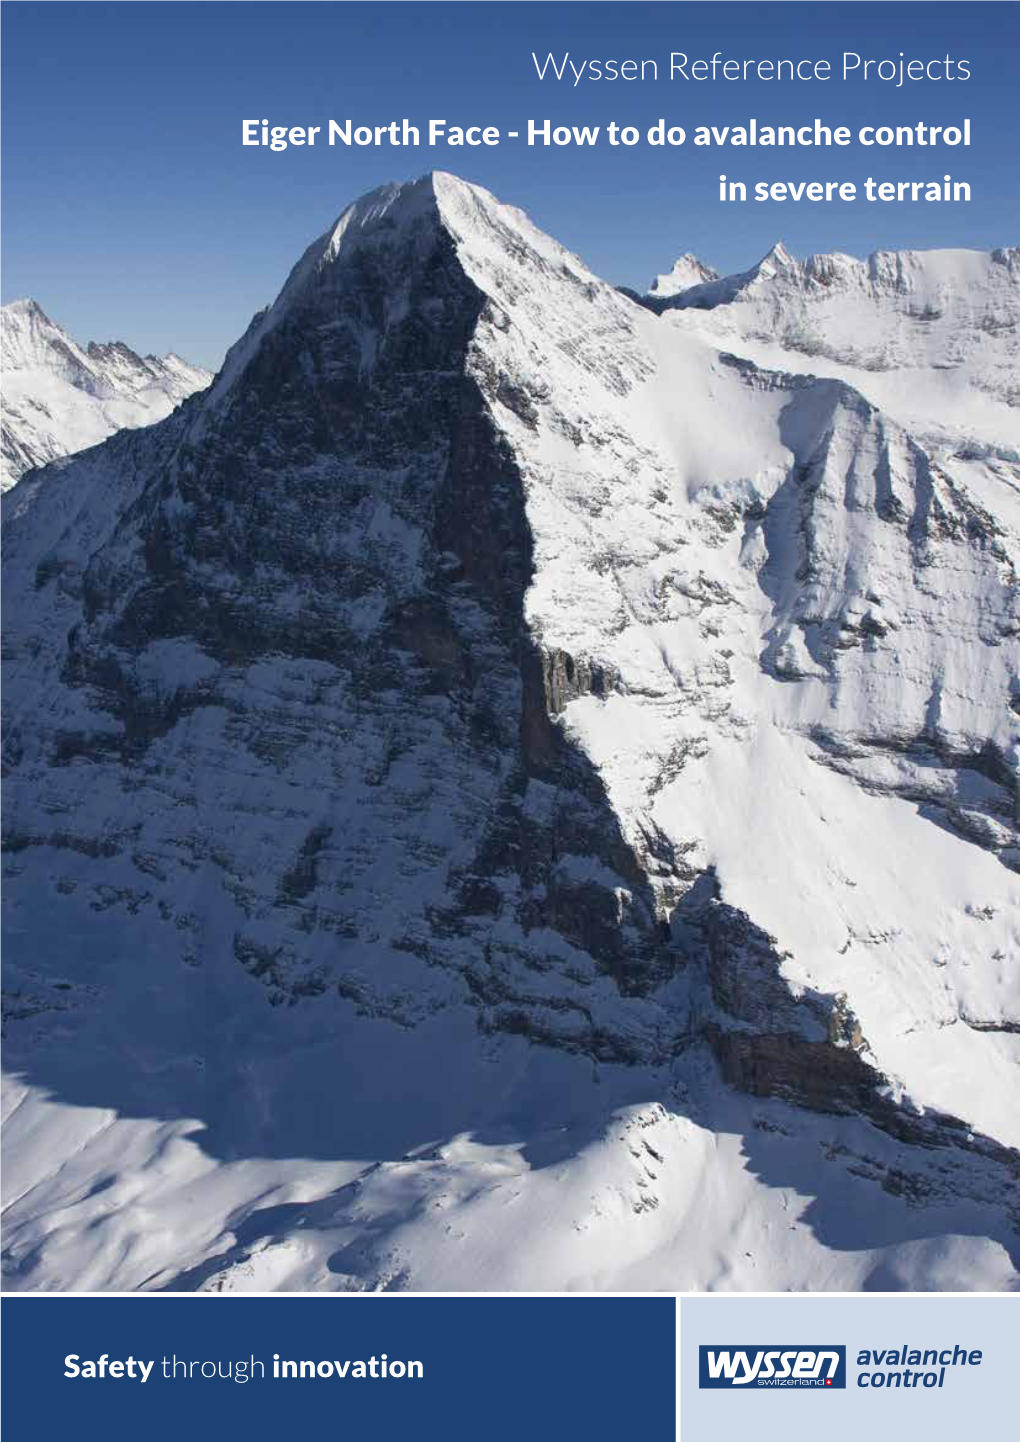 Wyssen Reference Projects Eiger North Face - How to Do Avalanche Control in Severe Terrain